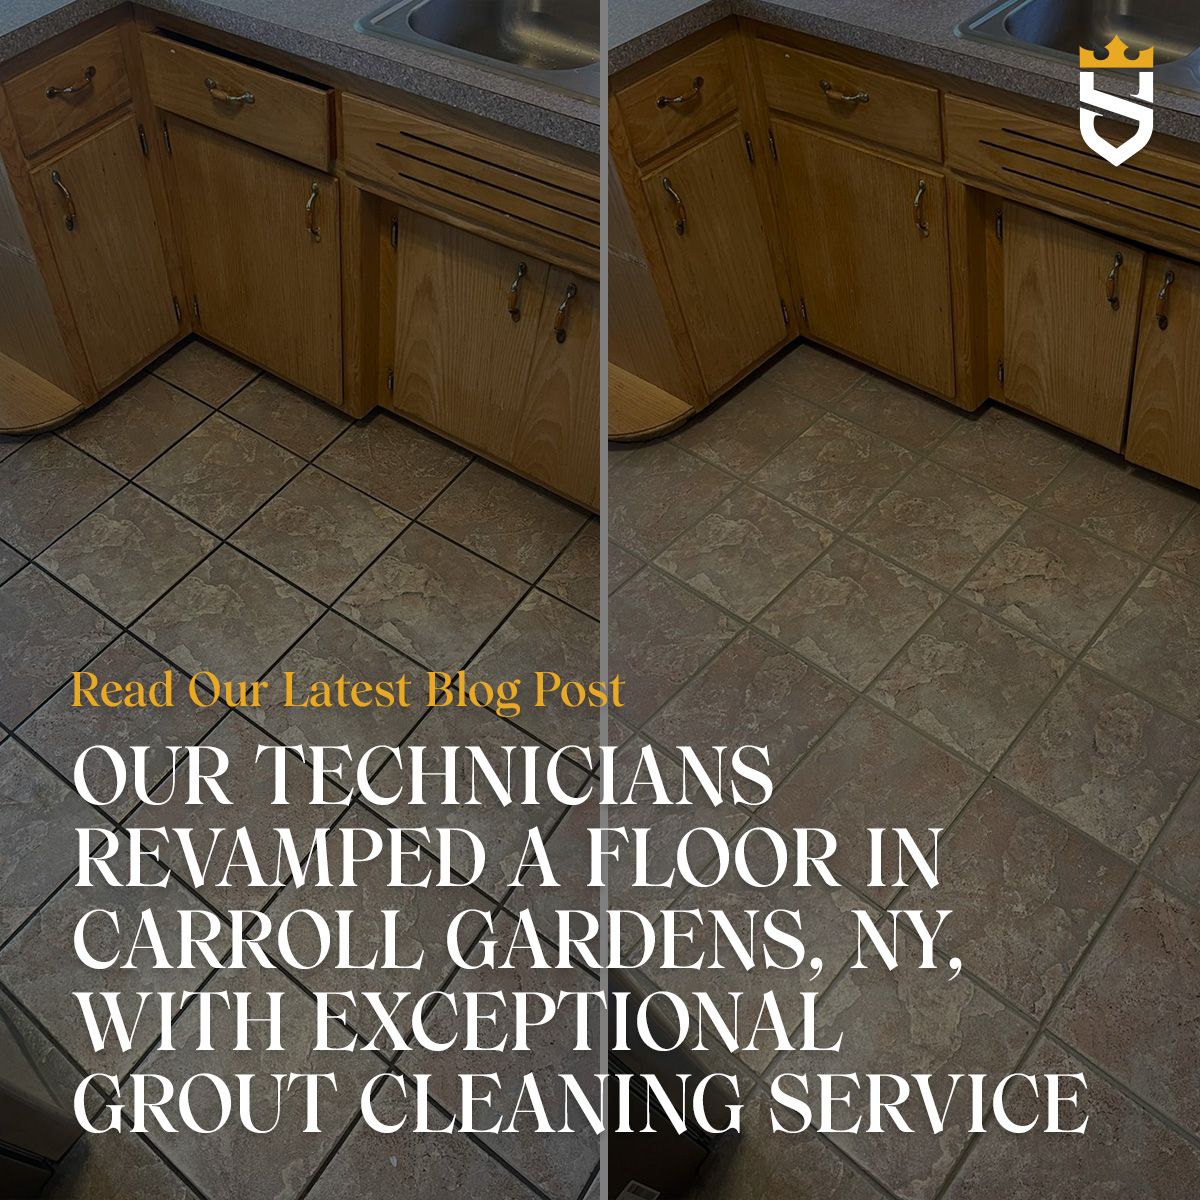 Our Technicians Revamped a Floor in Carroll Gardens, NY, With Exceptional Grout Cleaning Service